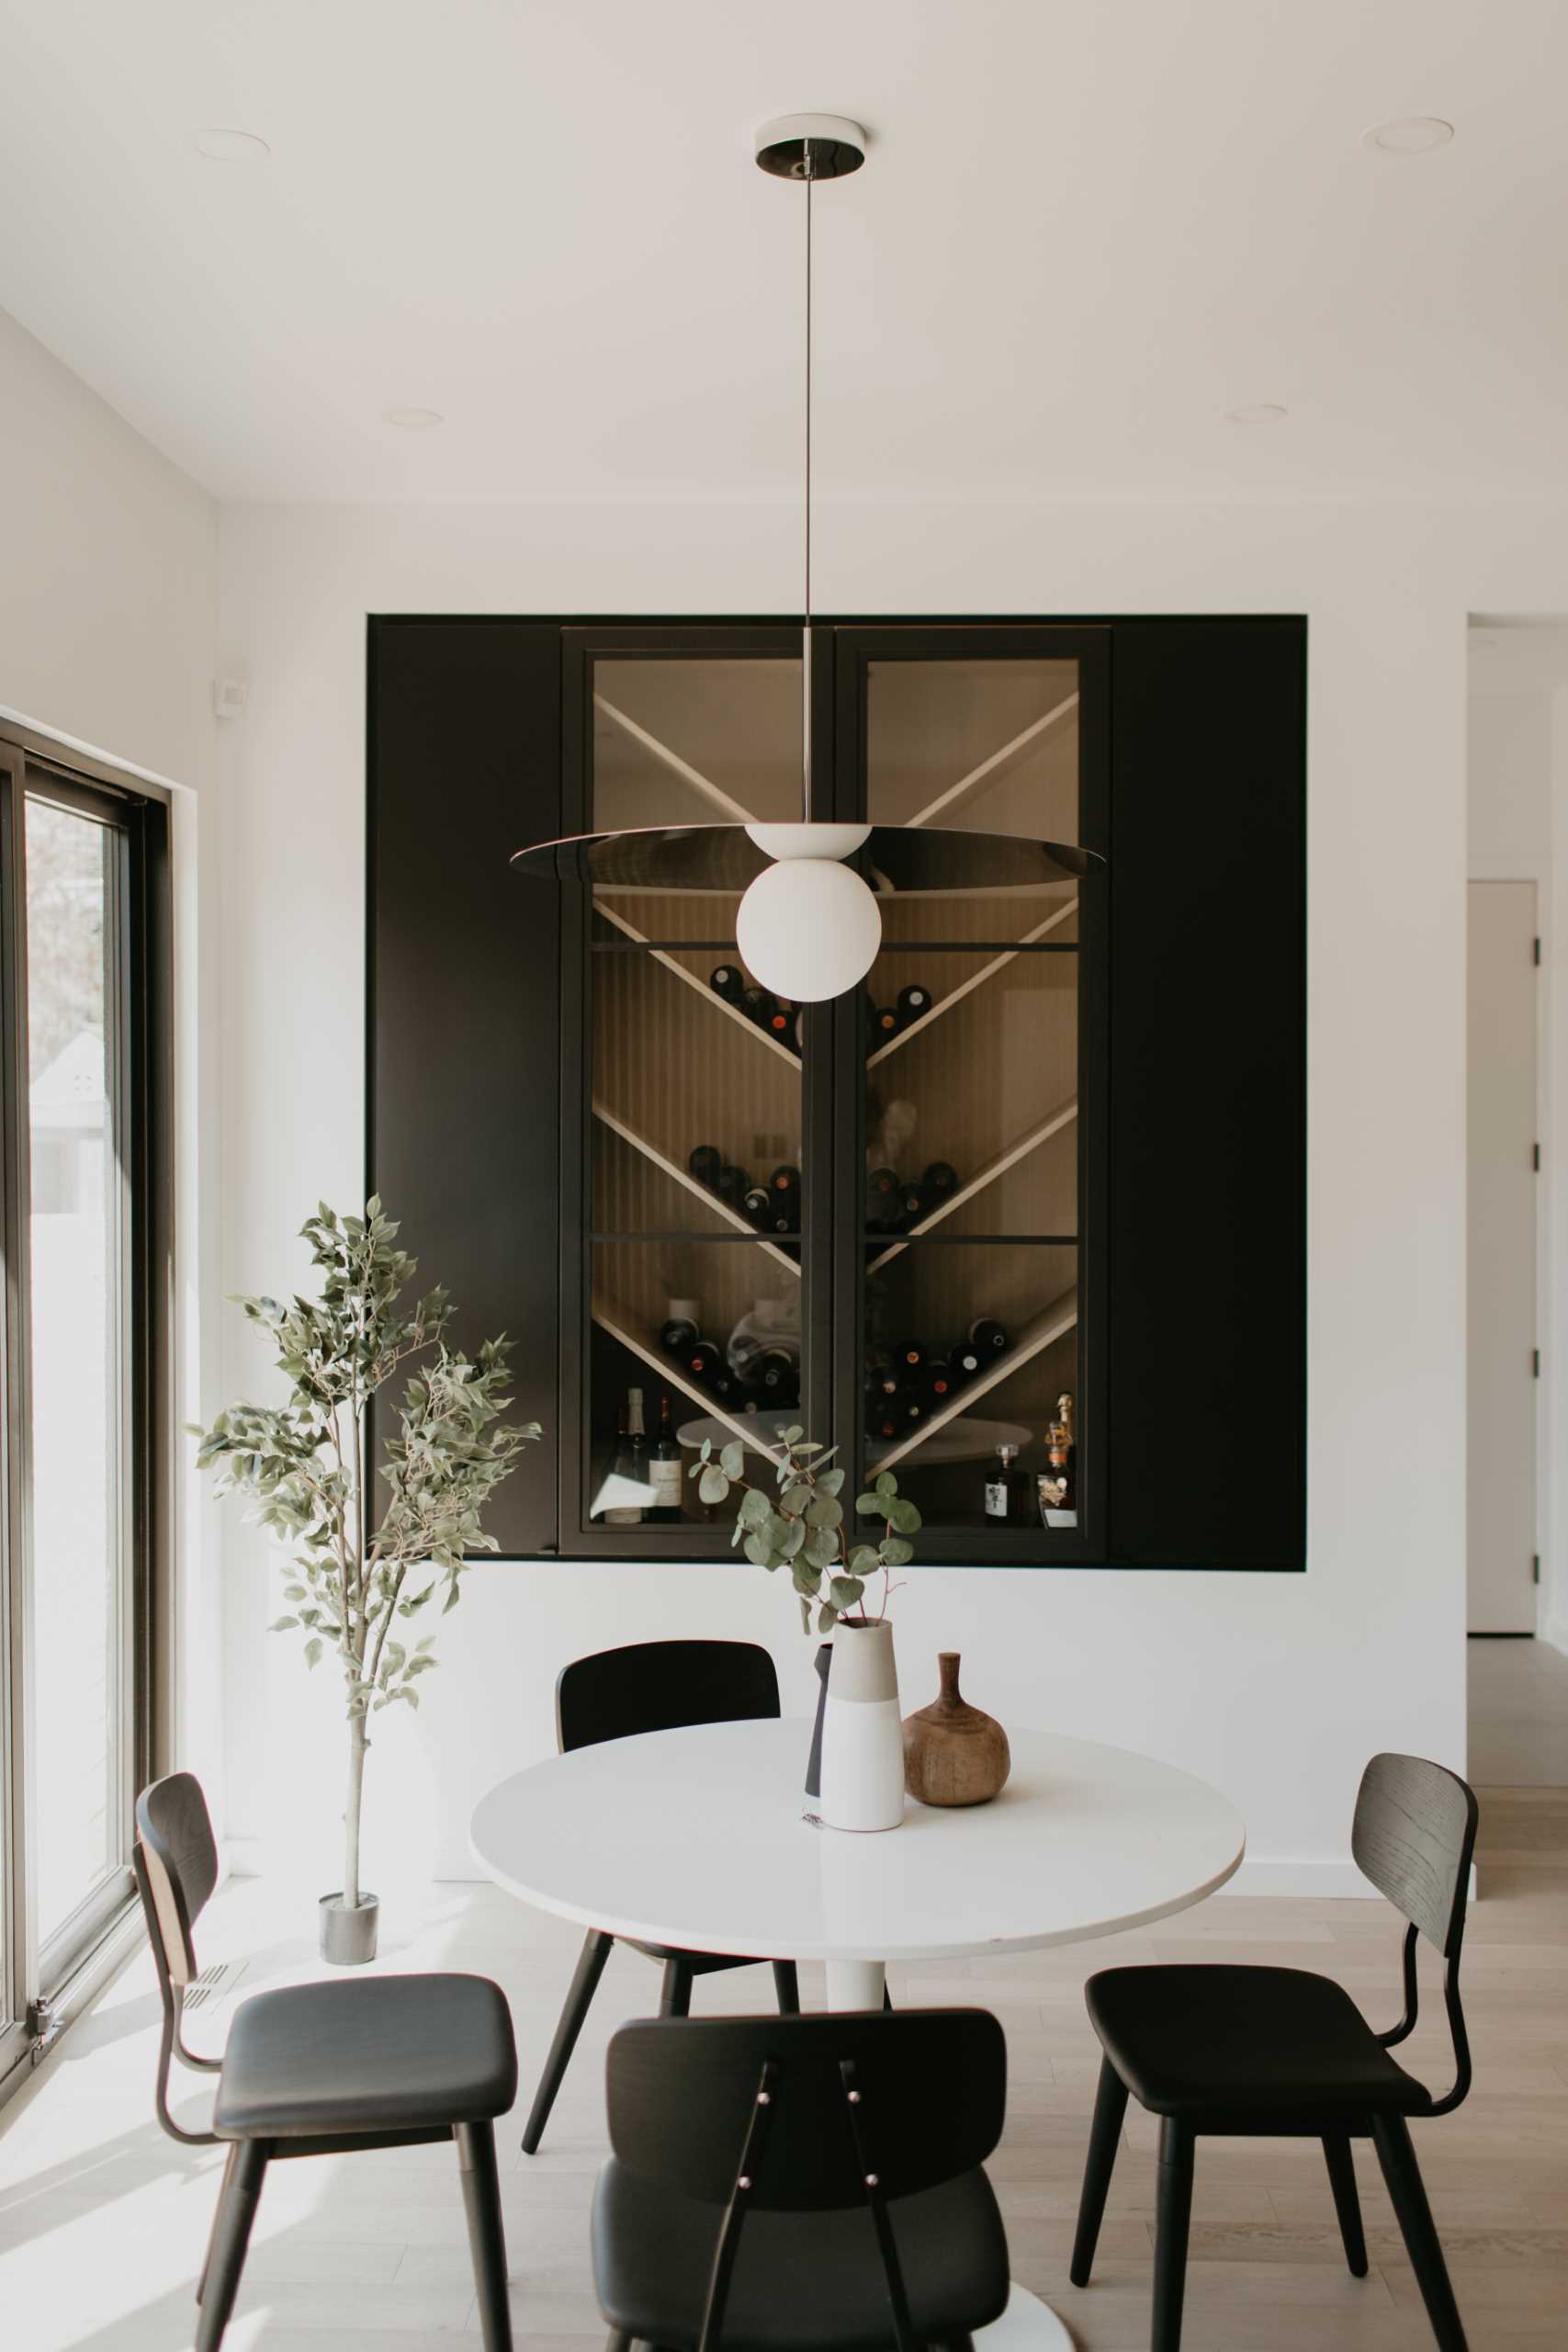 A wine rack with shelves angled in a chevron pattern creates an interesting focal point to this dining area, while a round table is positioned below the minimalist pendant light.